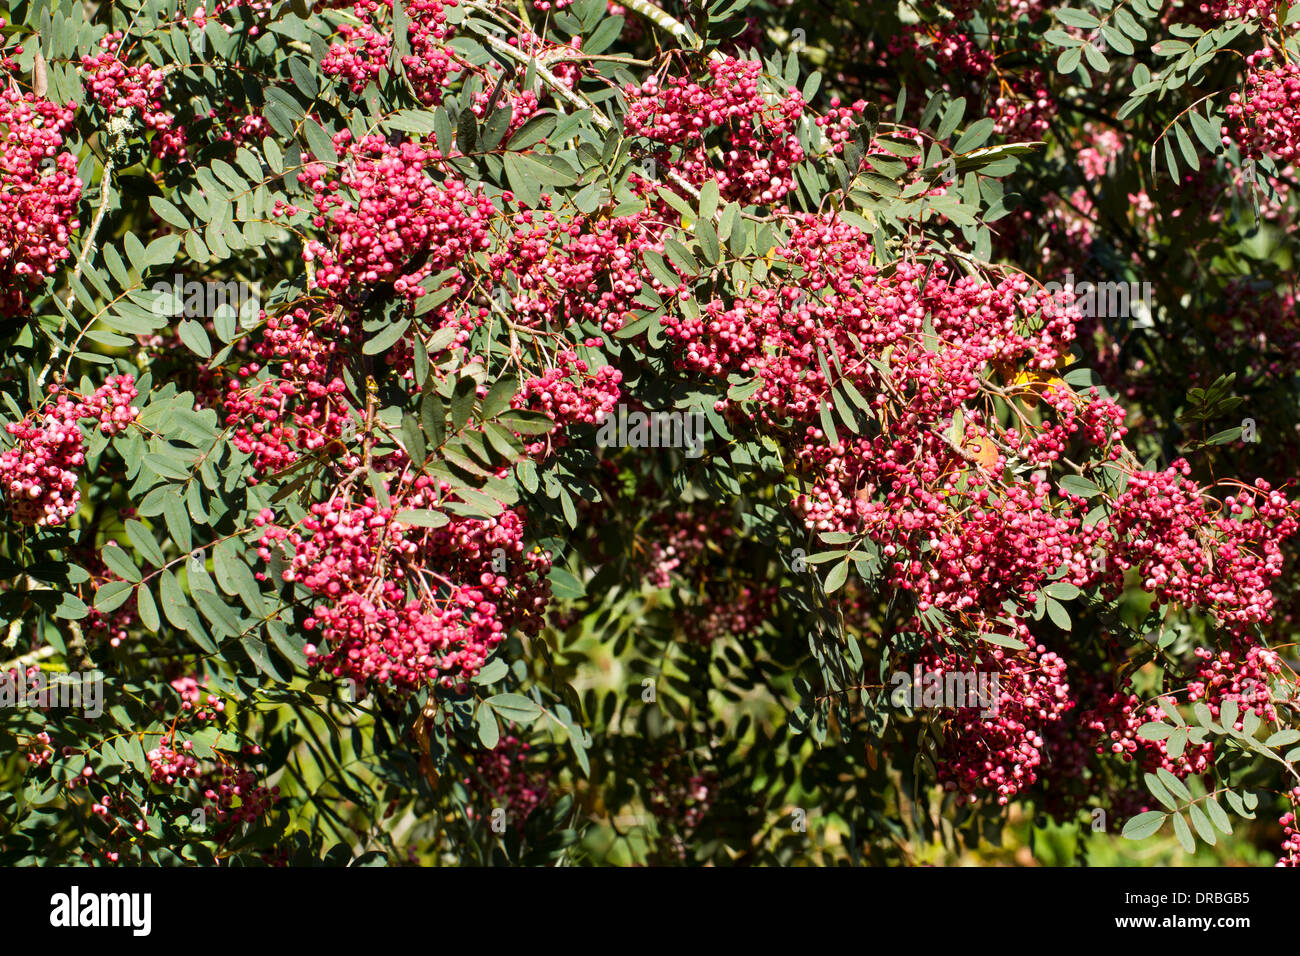 Berries of Sorbus pseudohupehensis 'Pink Pagoda' on a tree in a garden. Herefordshire, England. October. Stock Photo